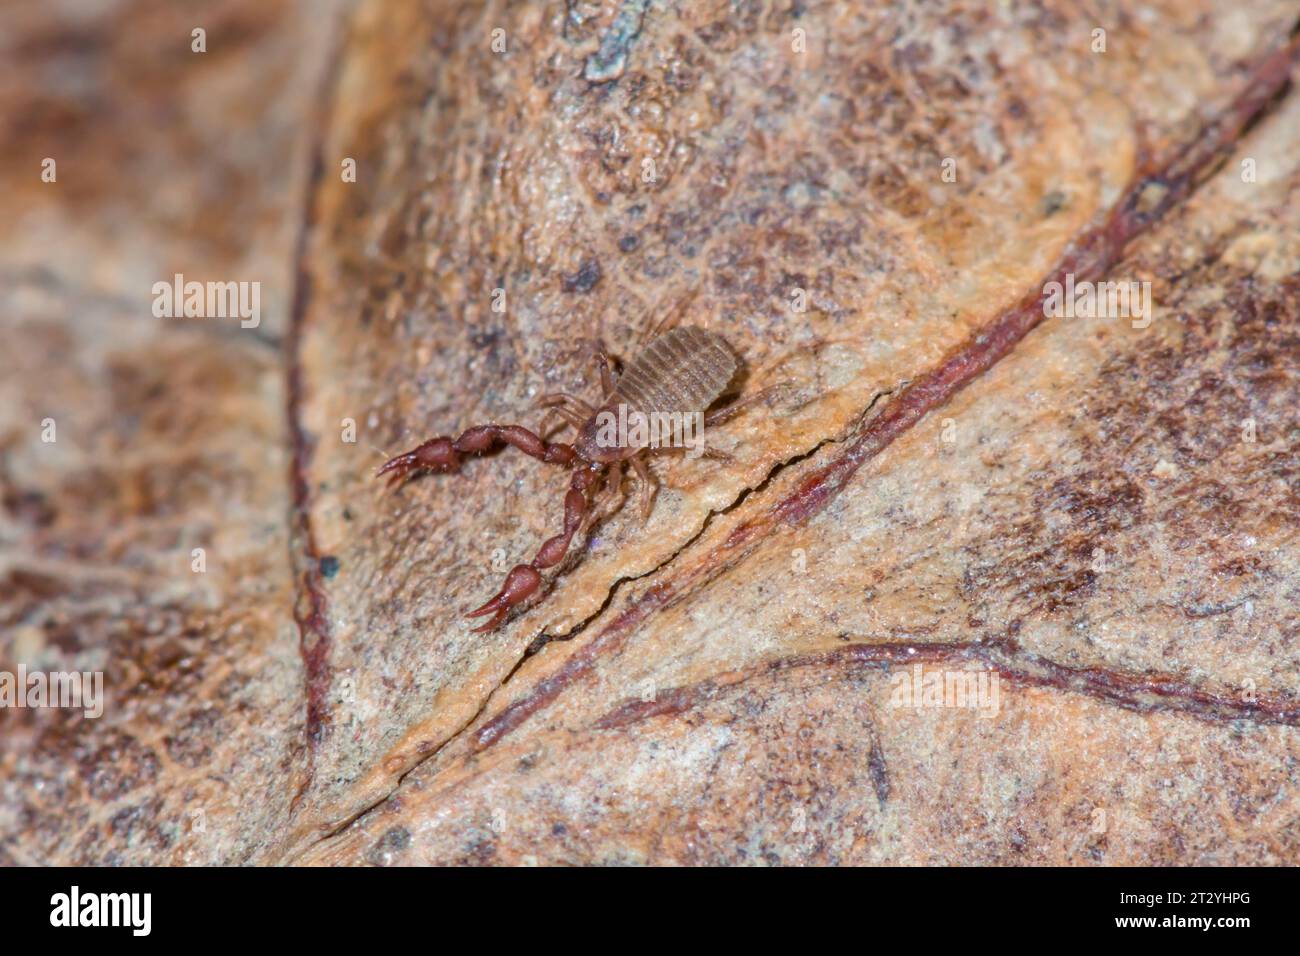 Compost Chernes Chelifer Pseudoscorpion (Pselaphochernes scorpioides) from Wood Ant nest. Sussex, UK Stock Photo